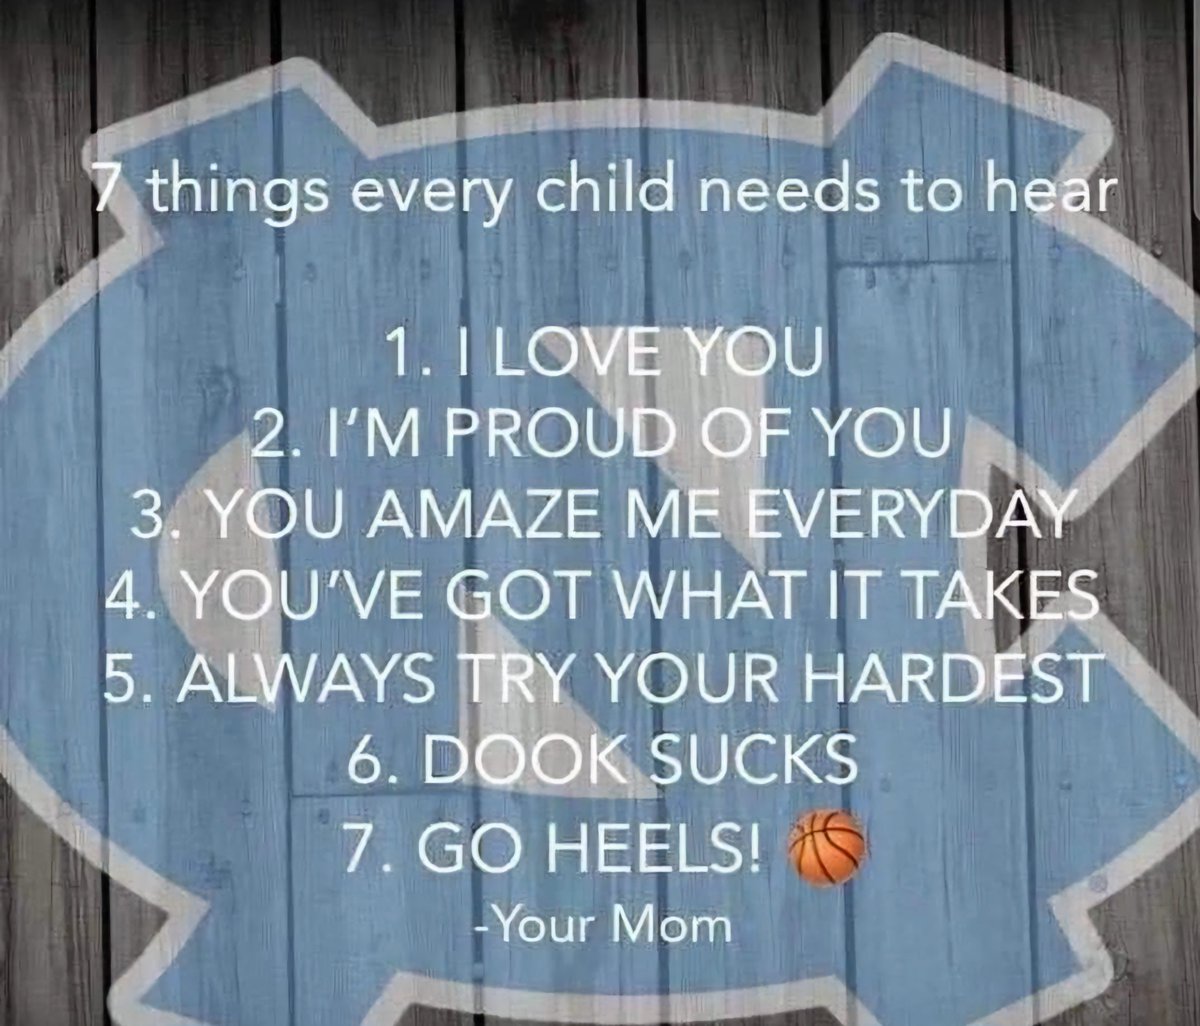 Happy Mother's Day to all the moms out there. Except for the moms of dook fans. Y'all should have done better. #GoHeels #GTHD